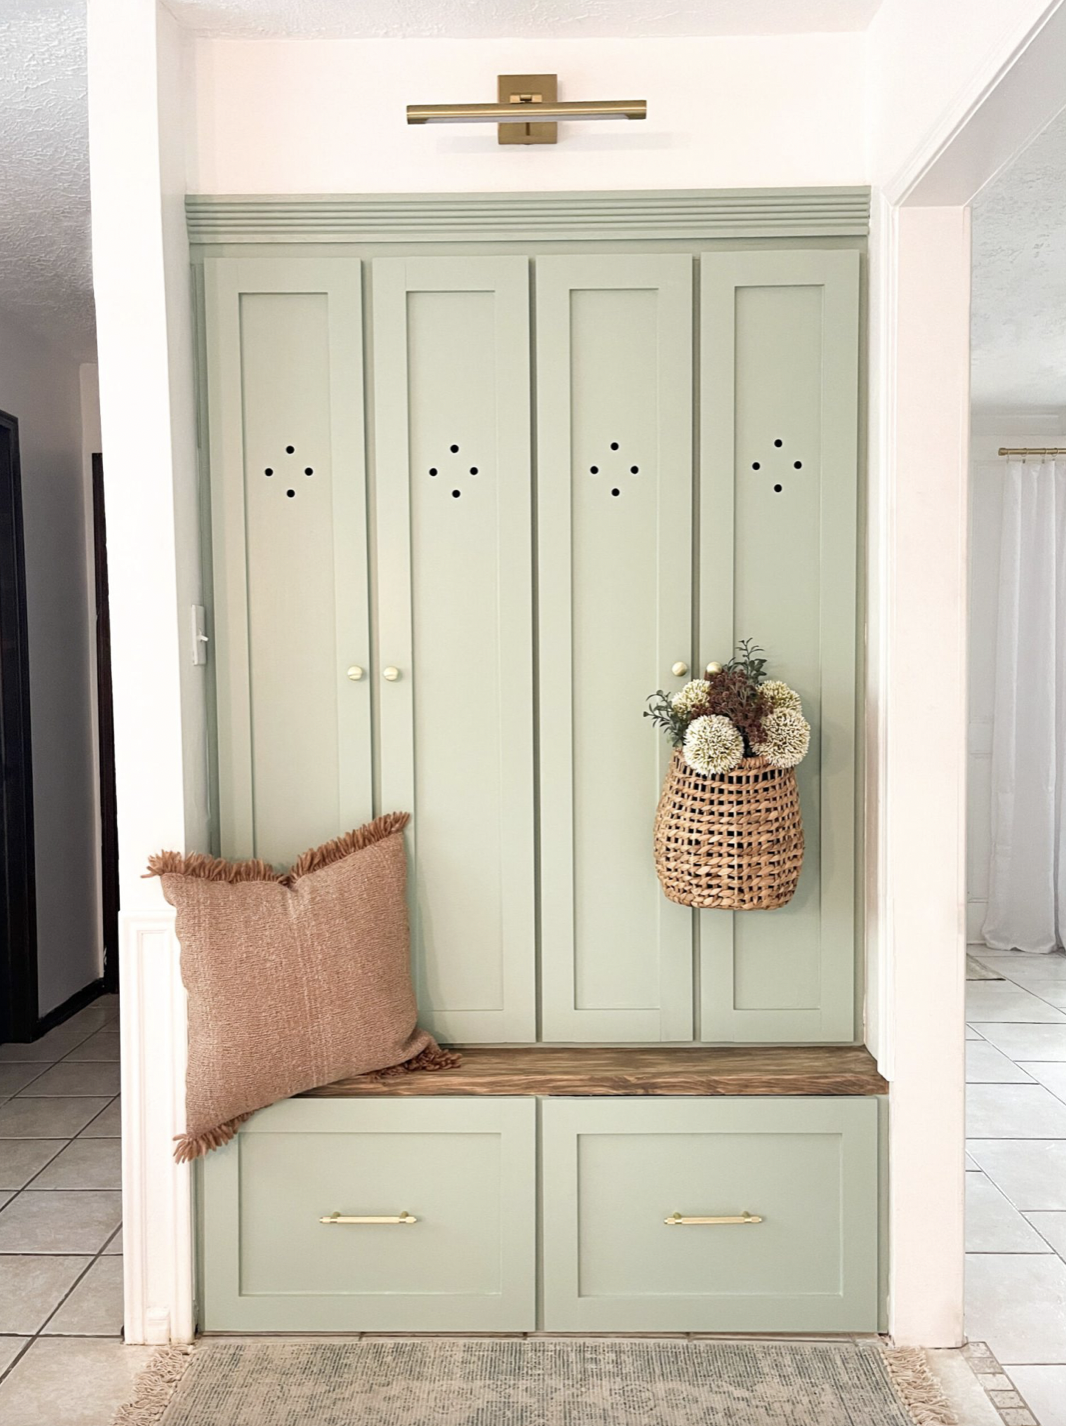 Mudroom Lockers With Bench Plans